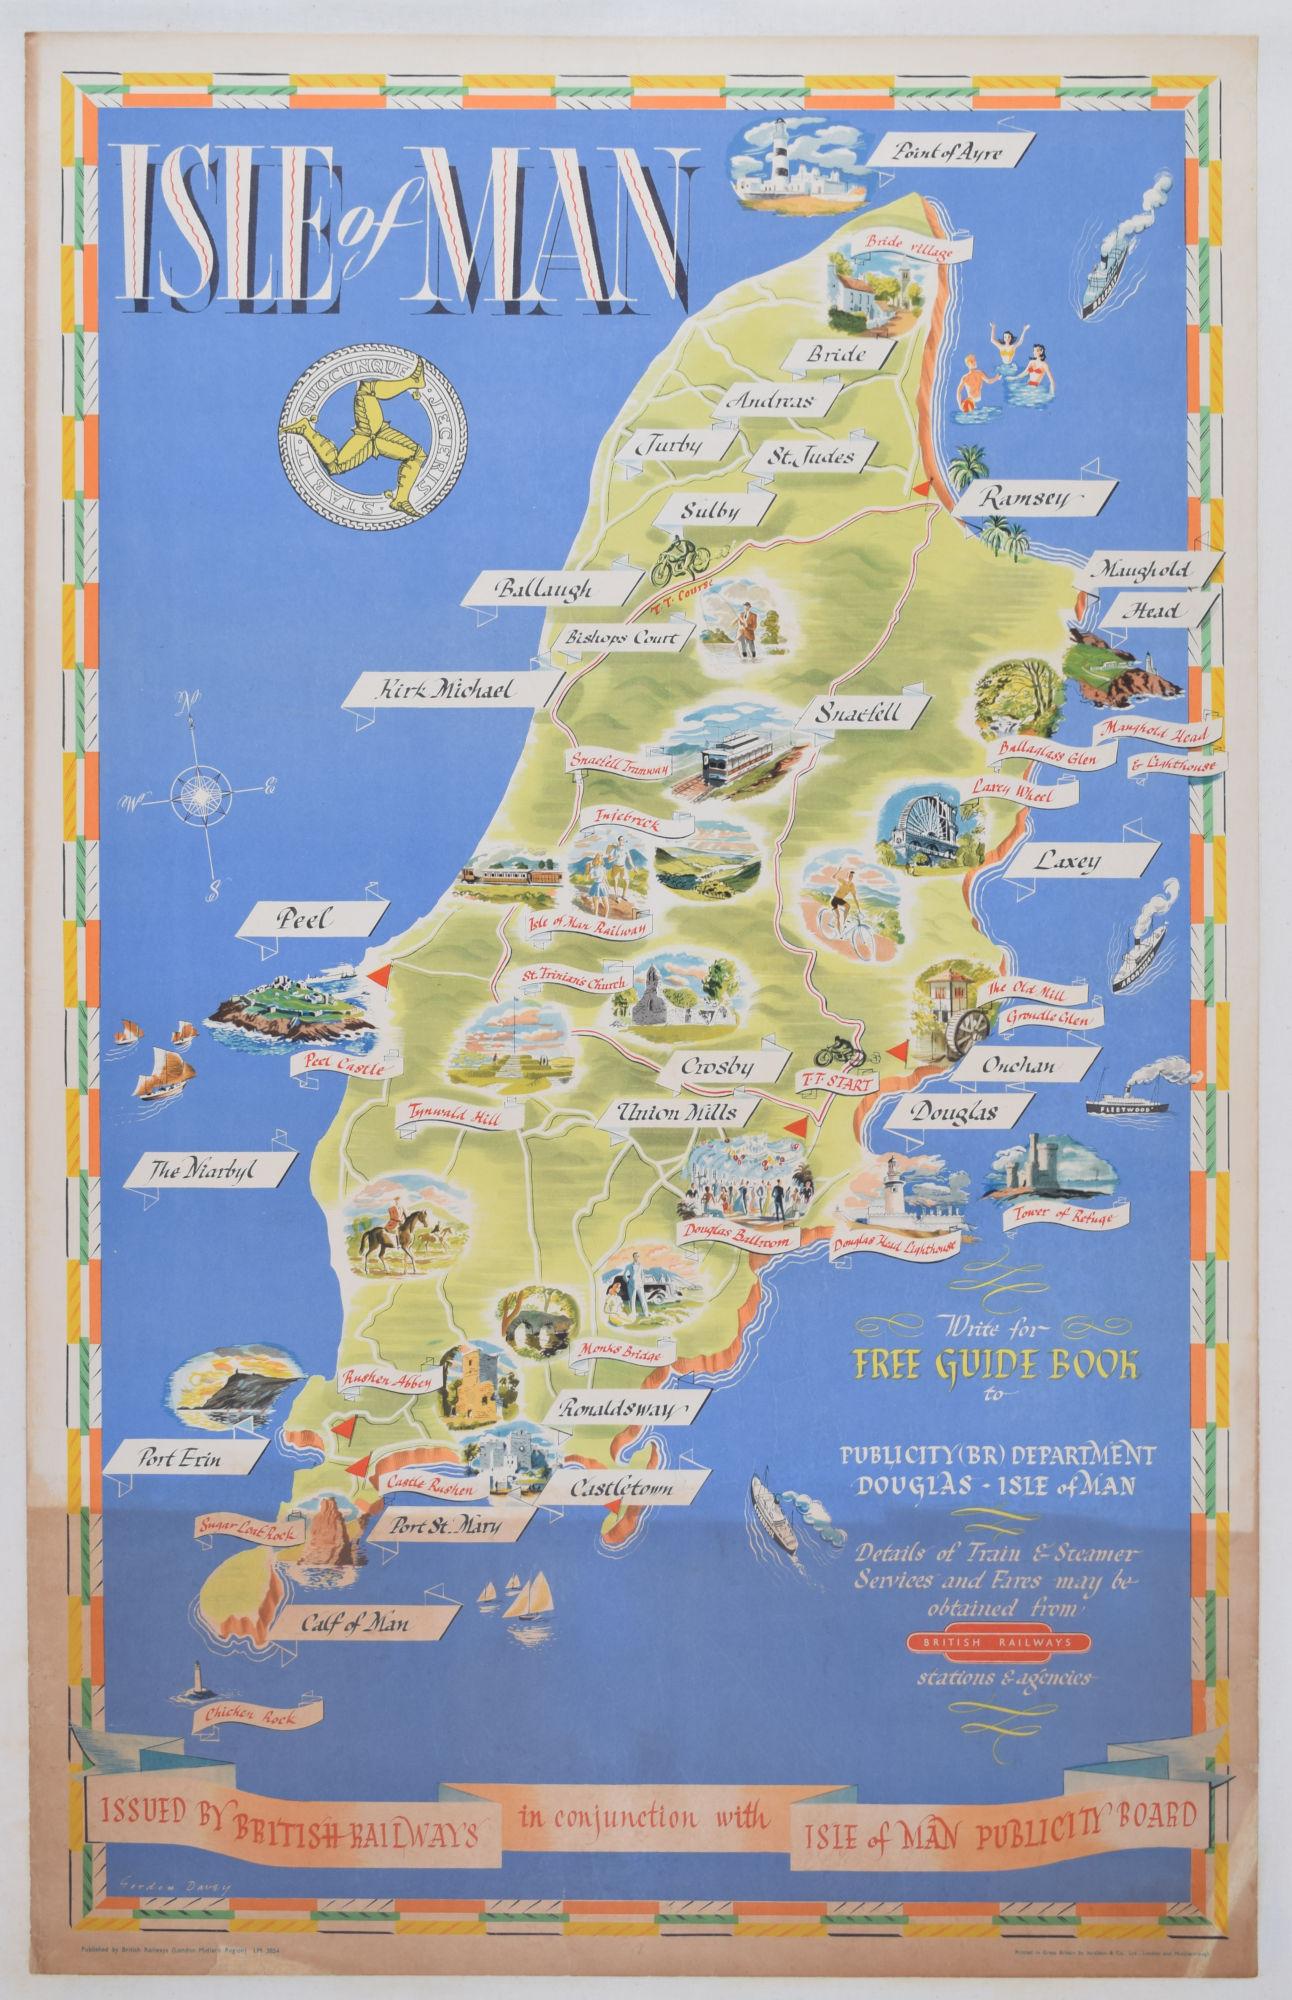 To see our other original vintage posters, scroll down to "More from this Seller" and below it click on "See all from this Seller" - or send us a message if you cannot find the poster you want.

Gordon Davey (1912 - 1991)
Isle of Man
Original